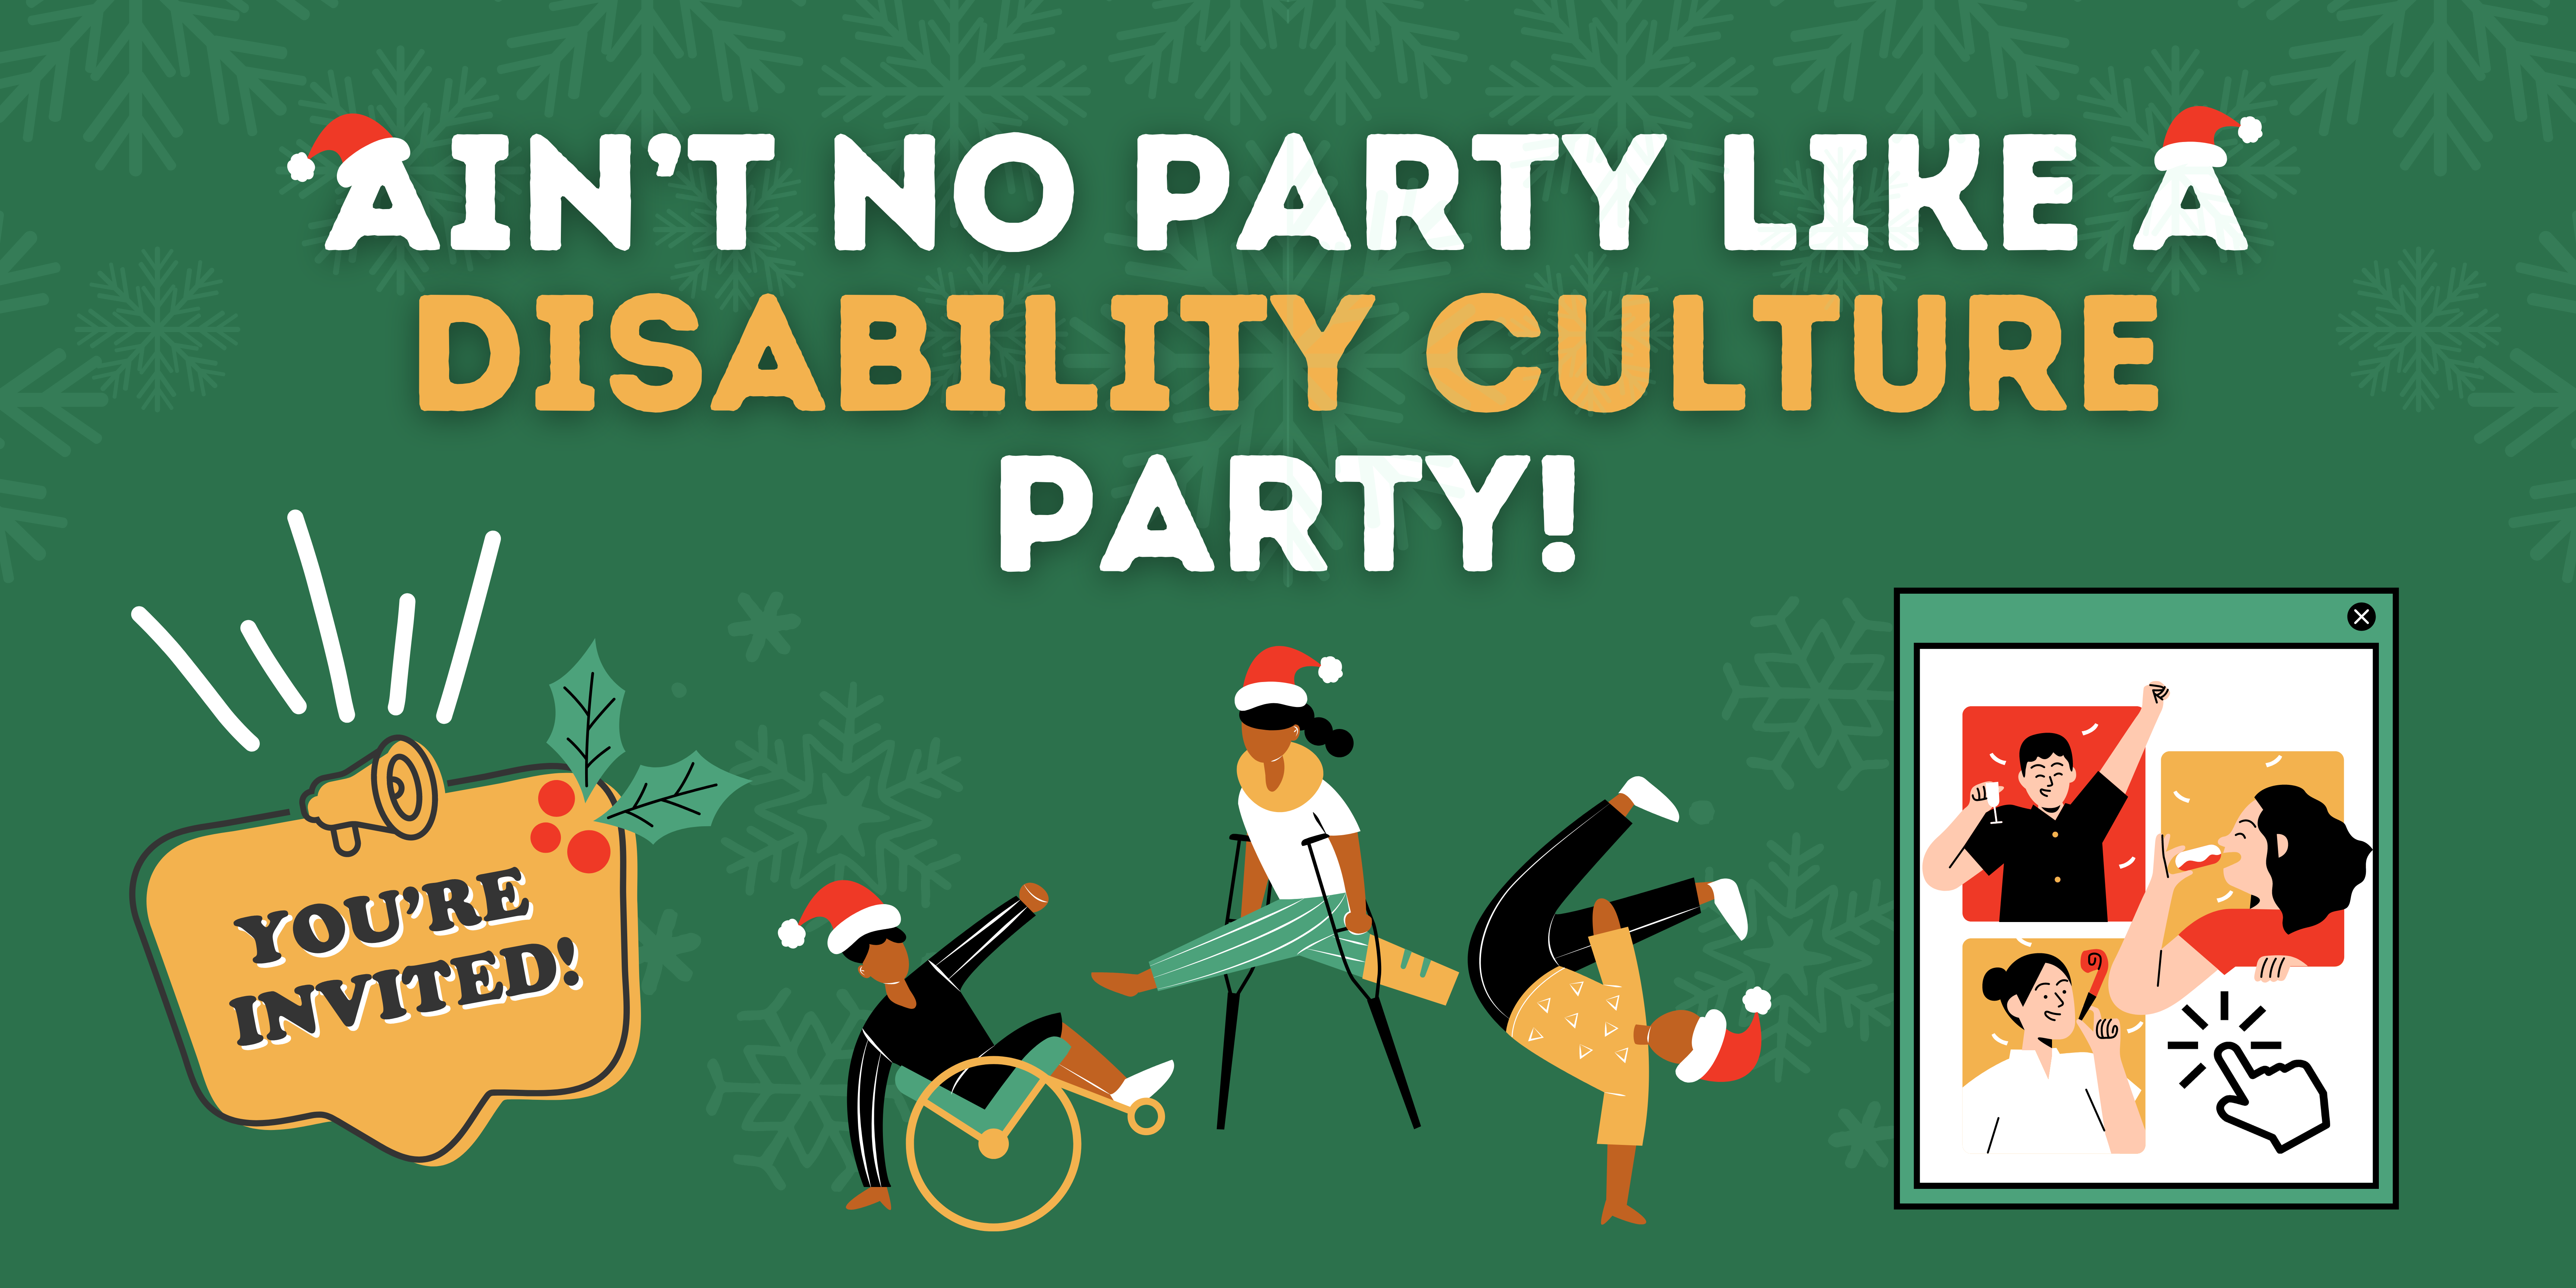 Ainâ€™t No Party Like a Disability Culture Party, You are invited sign with graphic of a wheelchair person dancing, person dancing with crutches, and another man doing a handstand